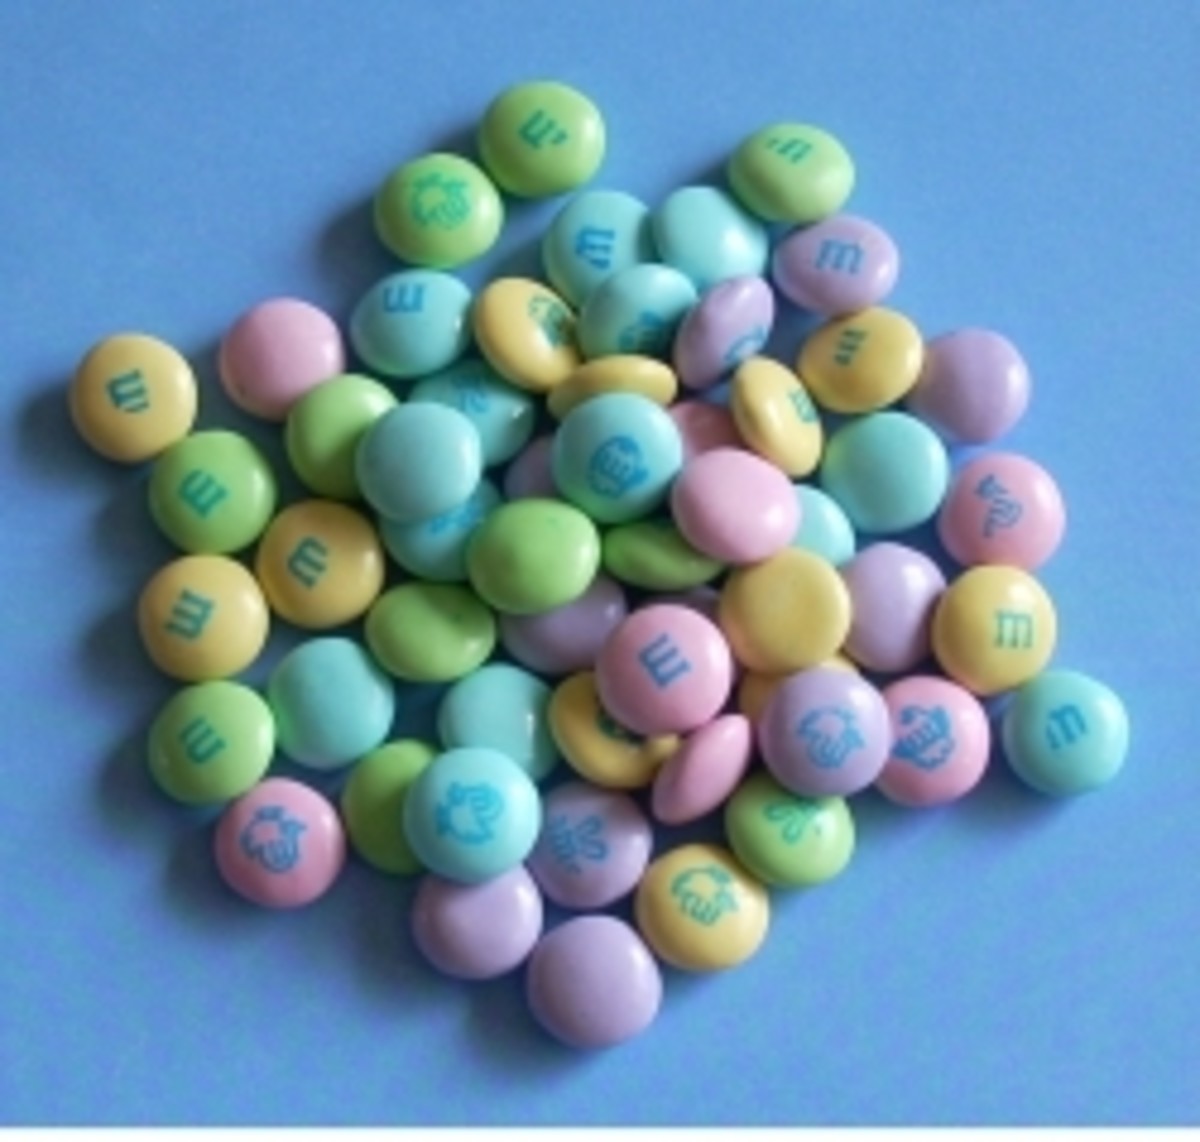 Easter M&M's